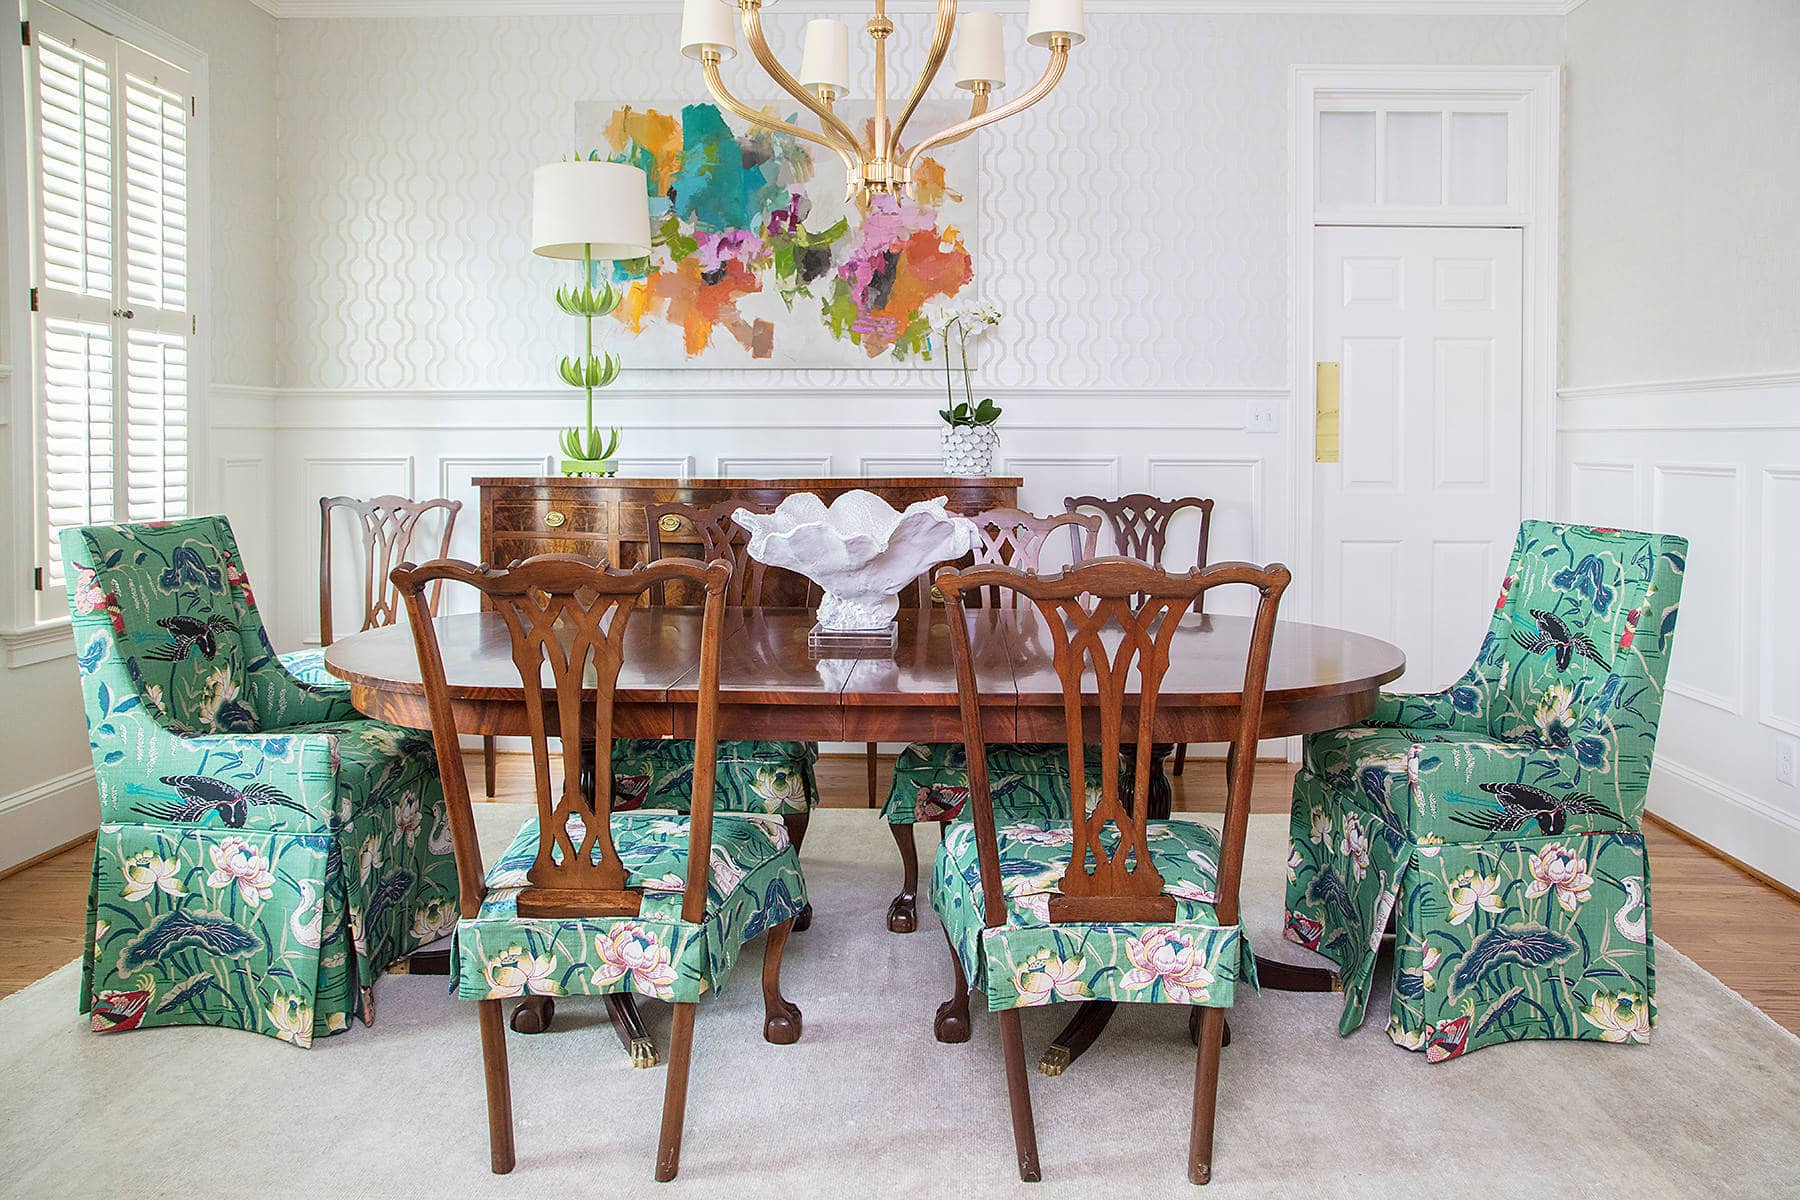 Traditional dining room featuring wood table and chairs with floral pattered covers in green and pink